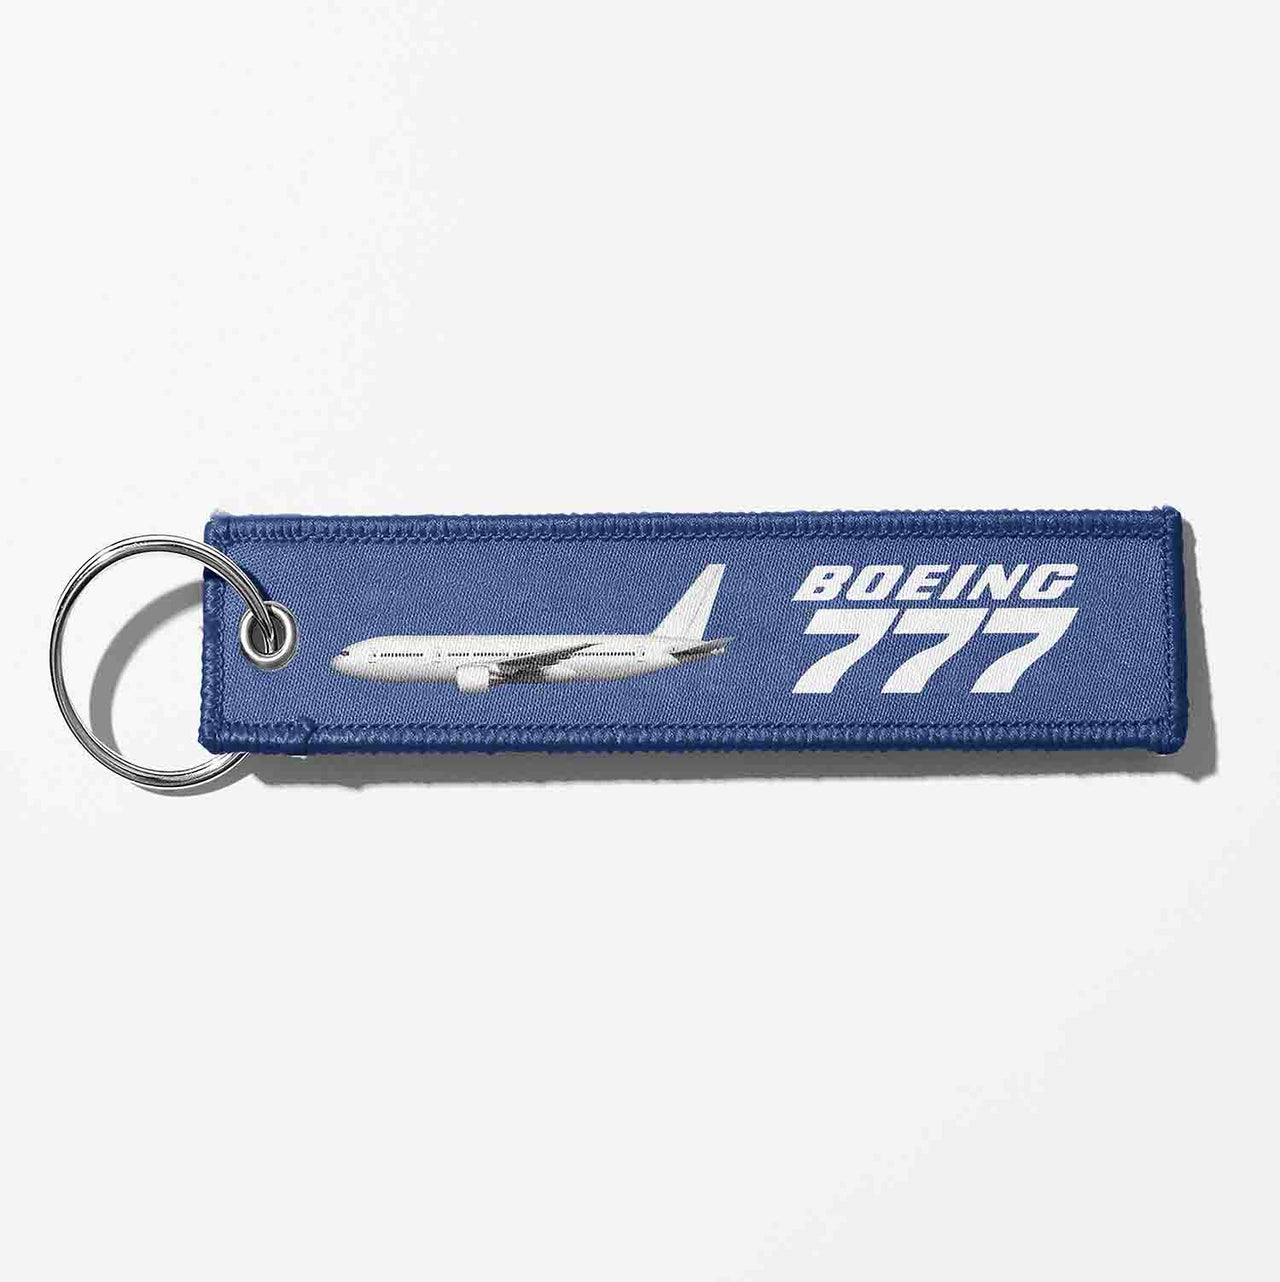 The Boeing 777 Designed Key Chains